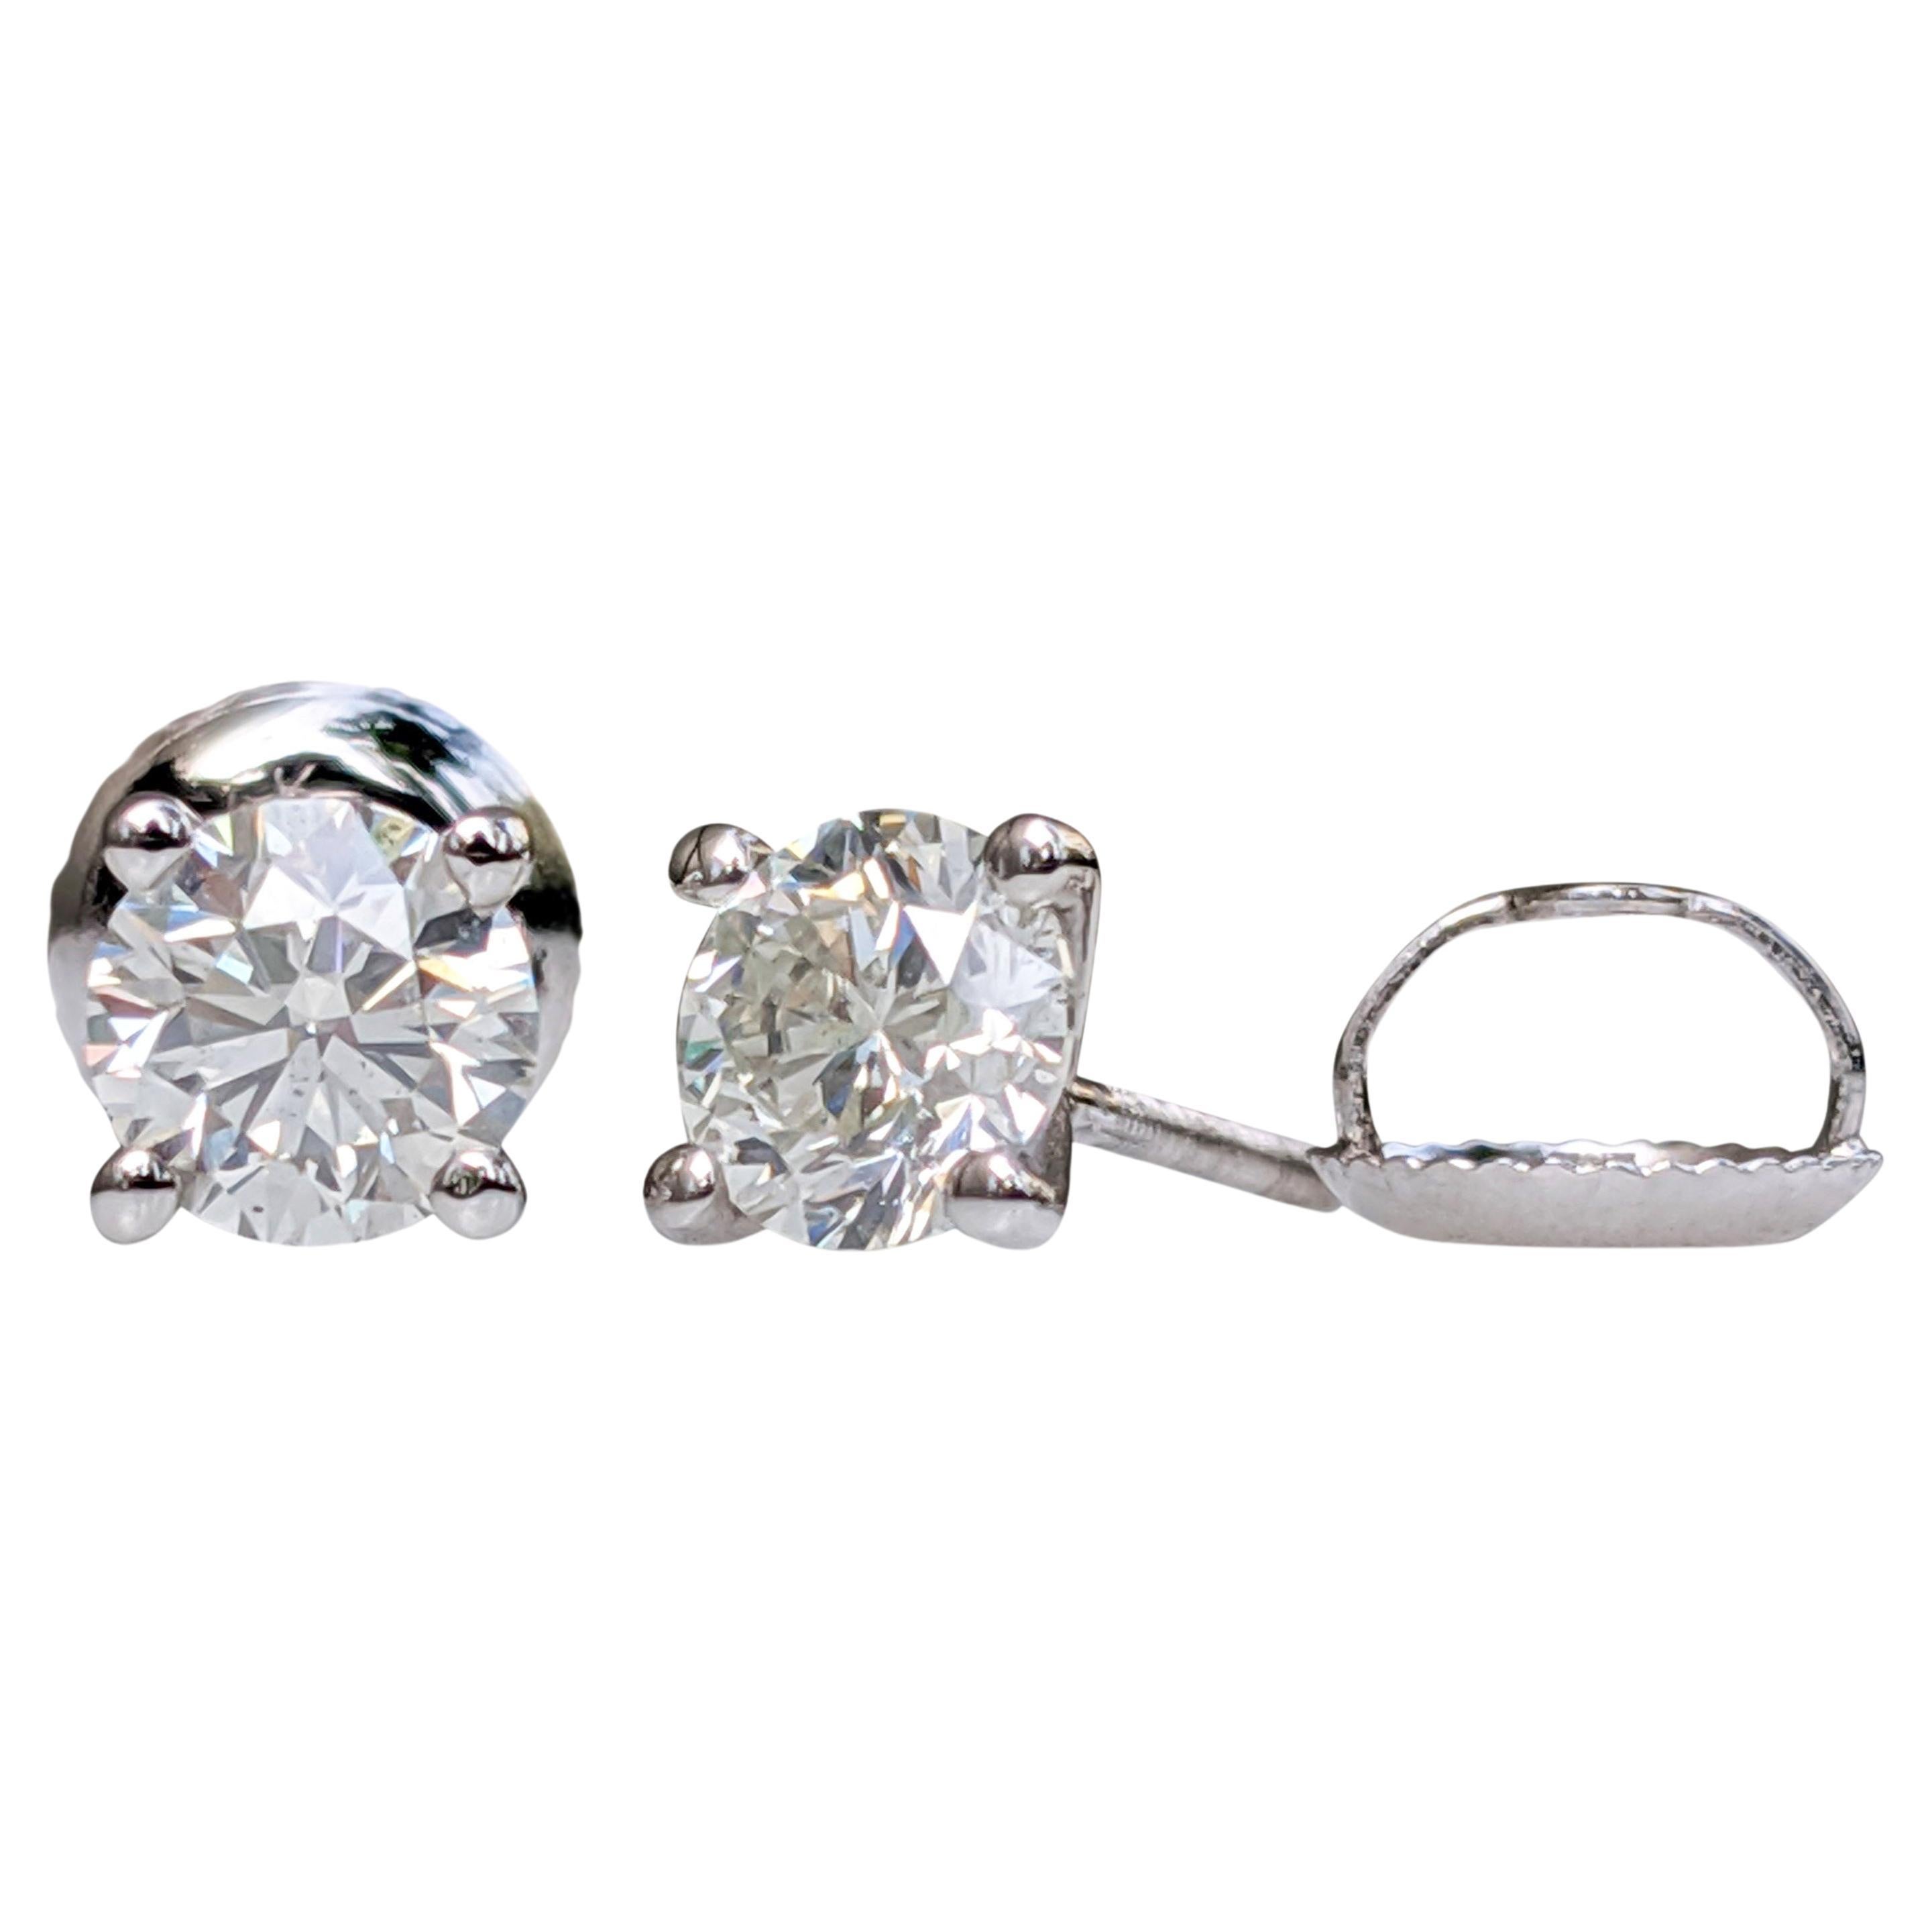 NO RESERVE! 1.00 Carat Diamond - 14 kt. White gold - Earrings For Sale